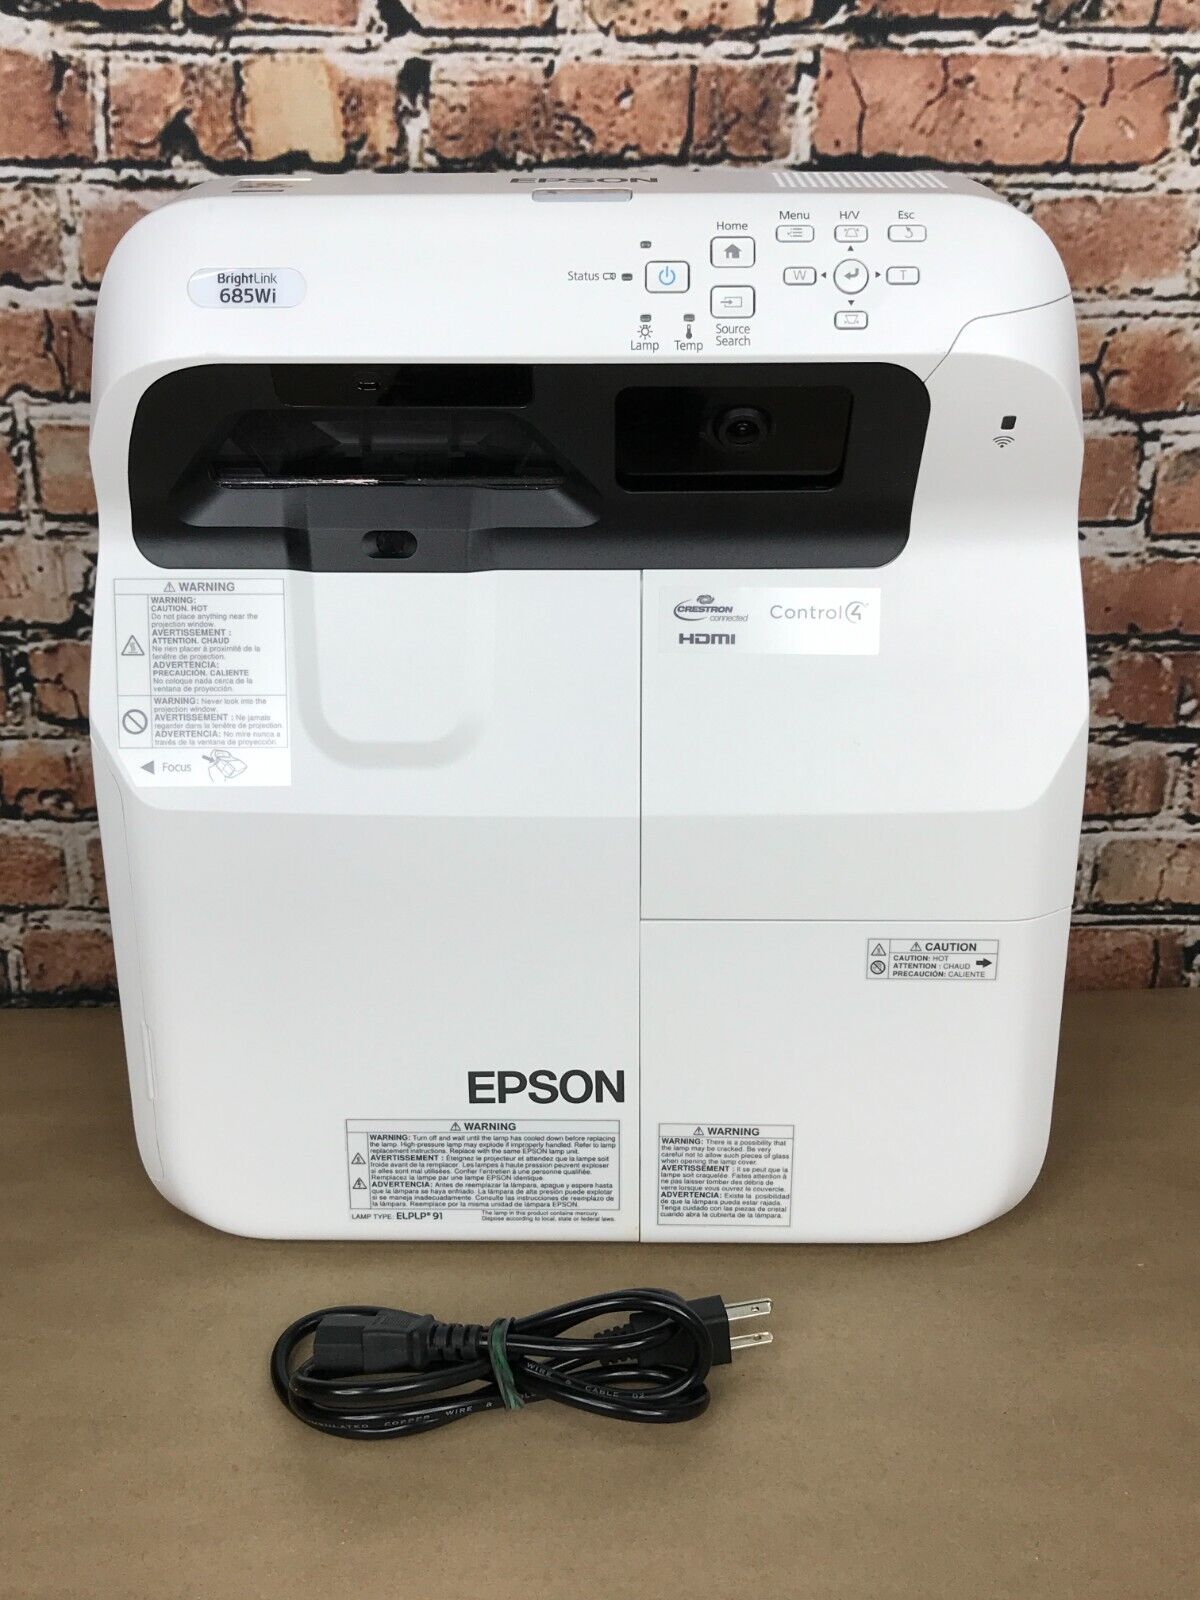 Epson BrightLink 685Wi WXGA Ultra Short-Throw Interactive With 391 Hours